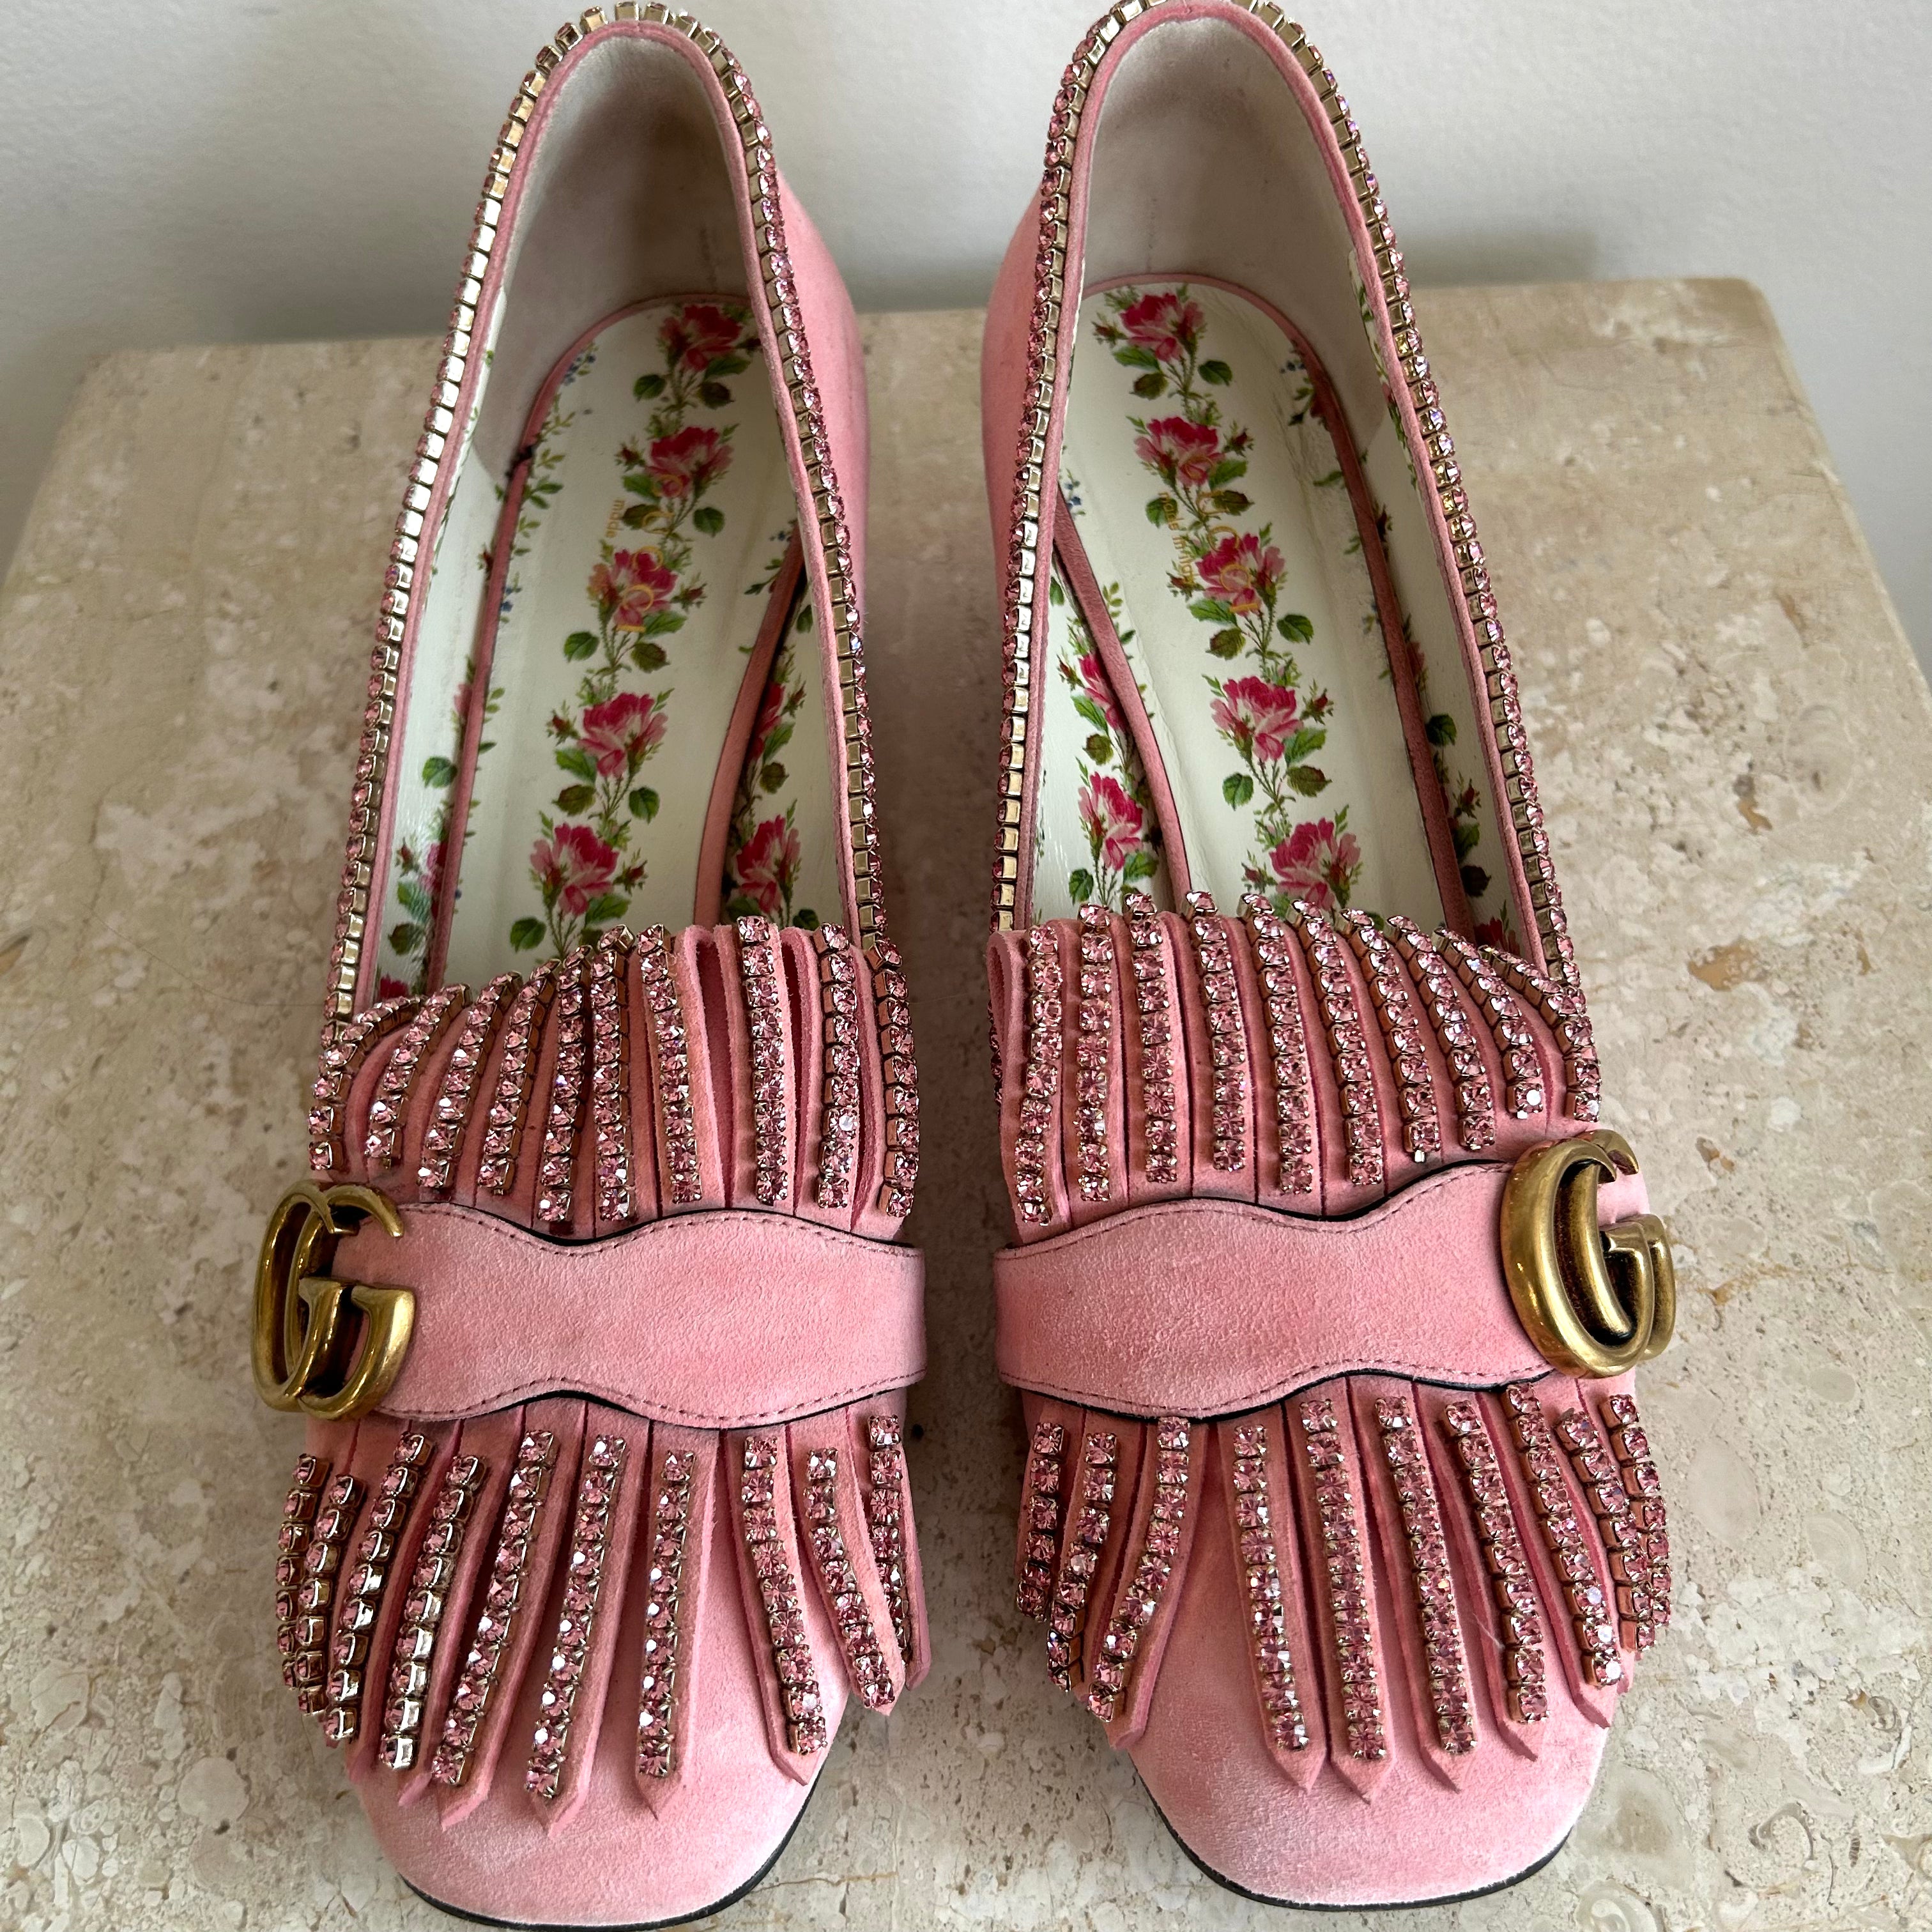 Pre-Owned GUCCI Light Rose Marmont Kiltie Heeled Loafer - Size 39